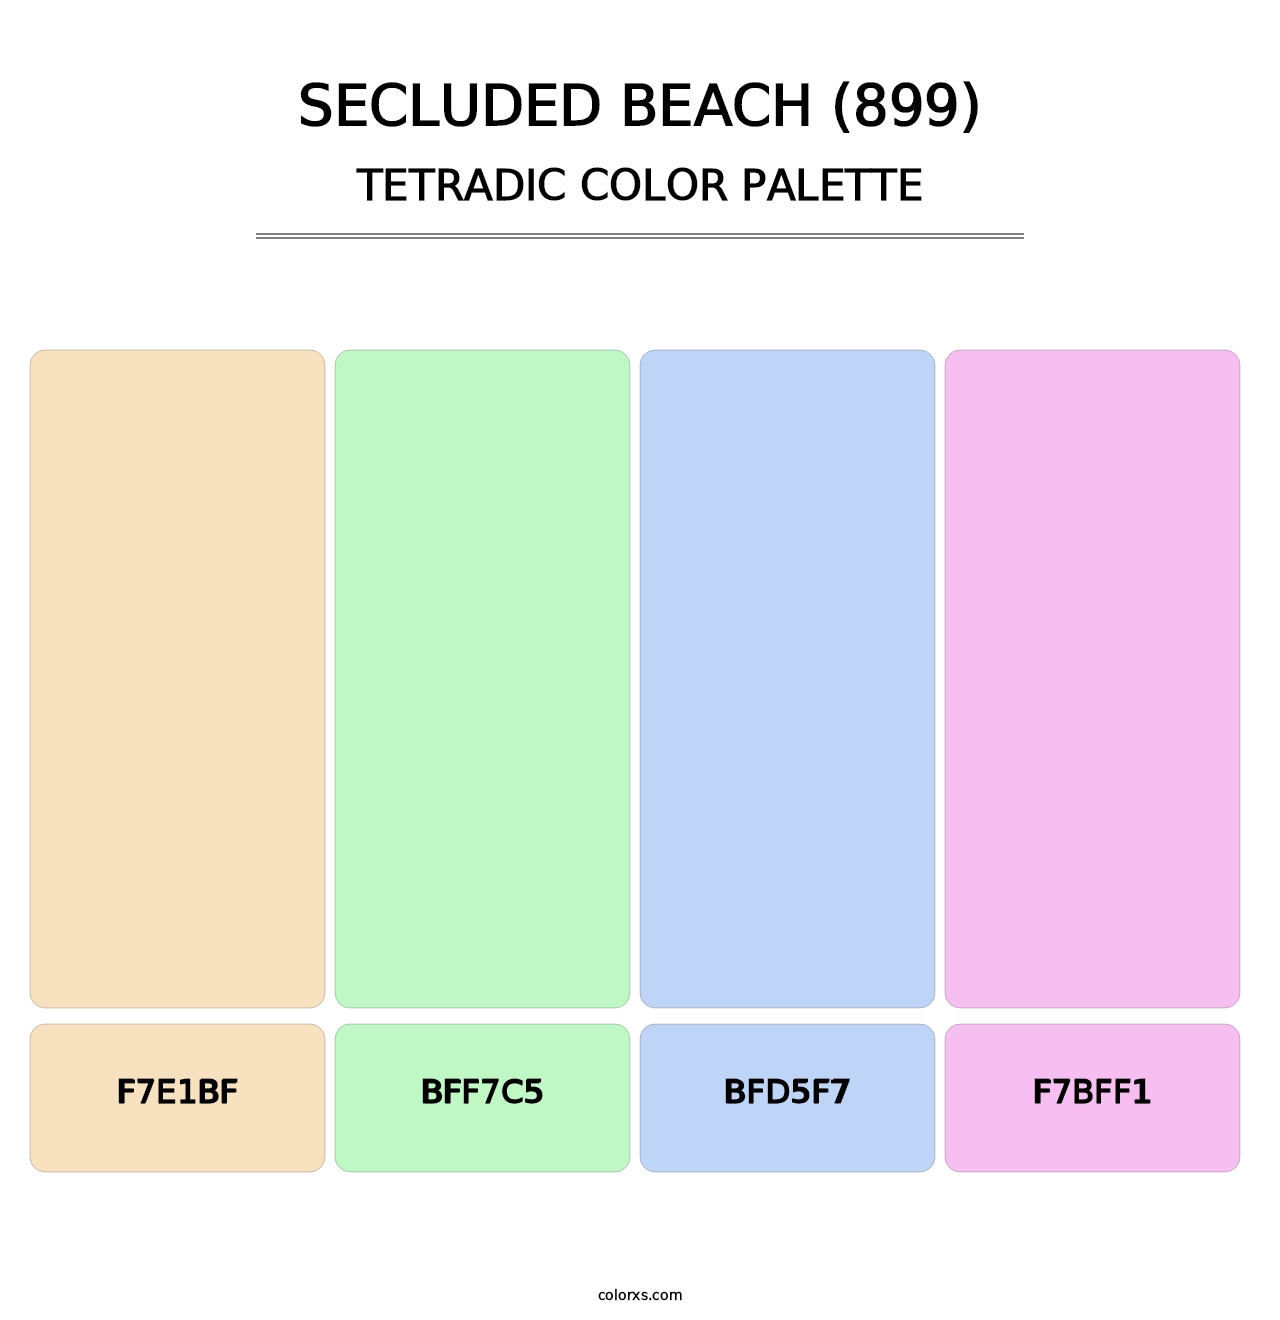 Secluded Beach (899) - Tetradic Color Palette